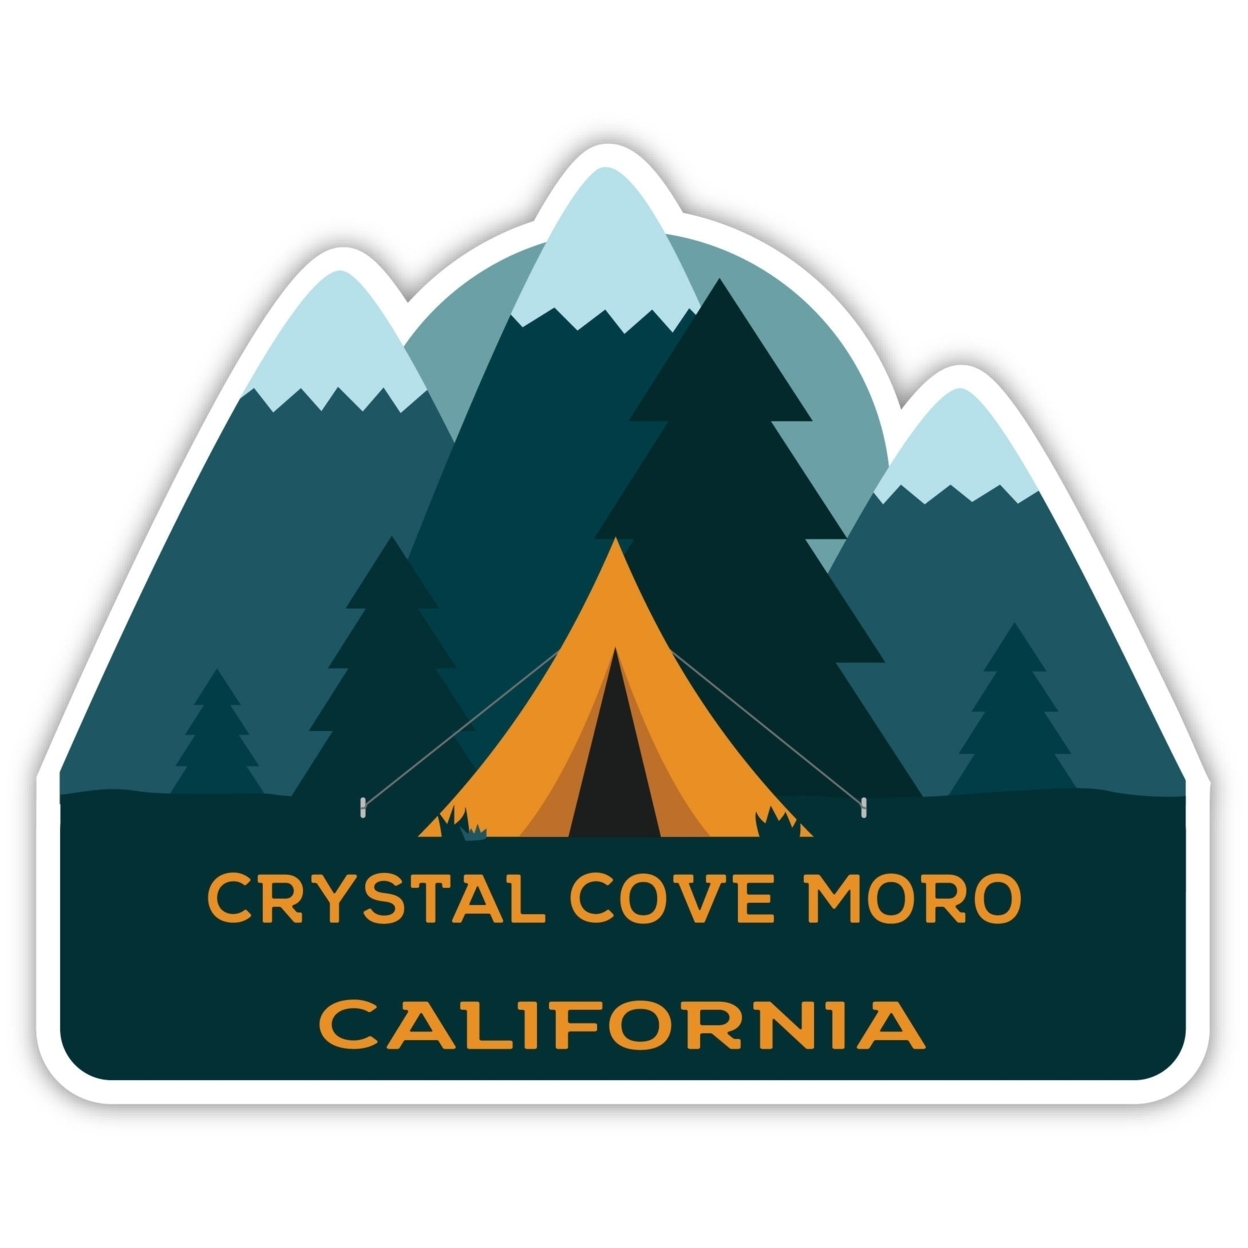 Crystal Cove Moro California Souvenir Decorative Stickers (Choose Theme And Size) - 4-Pack, 10-Inch, Tent